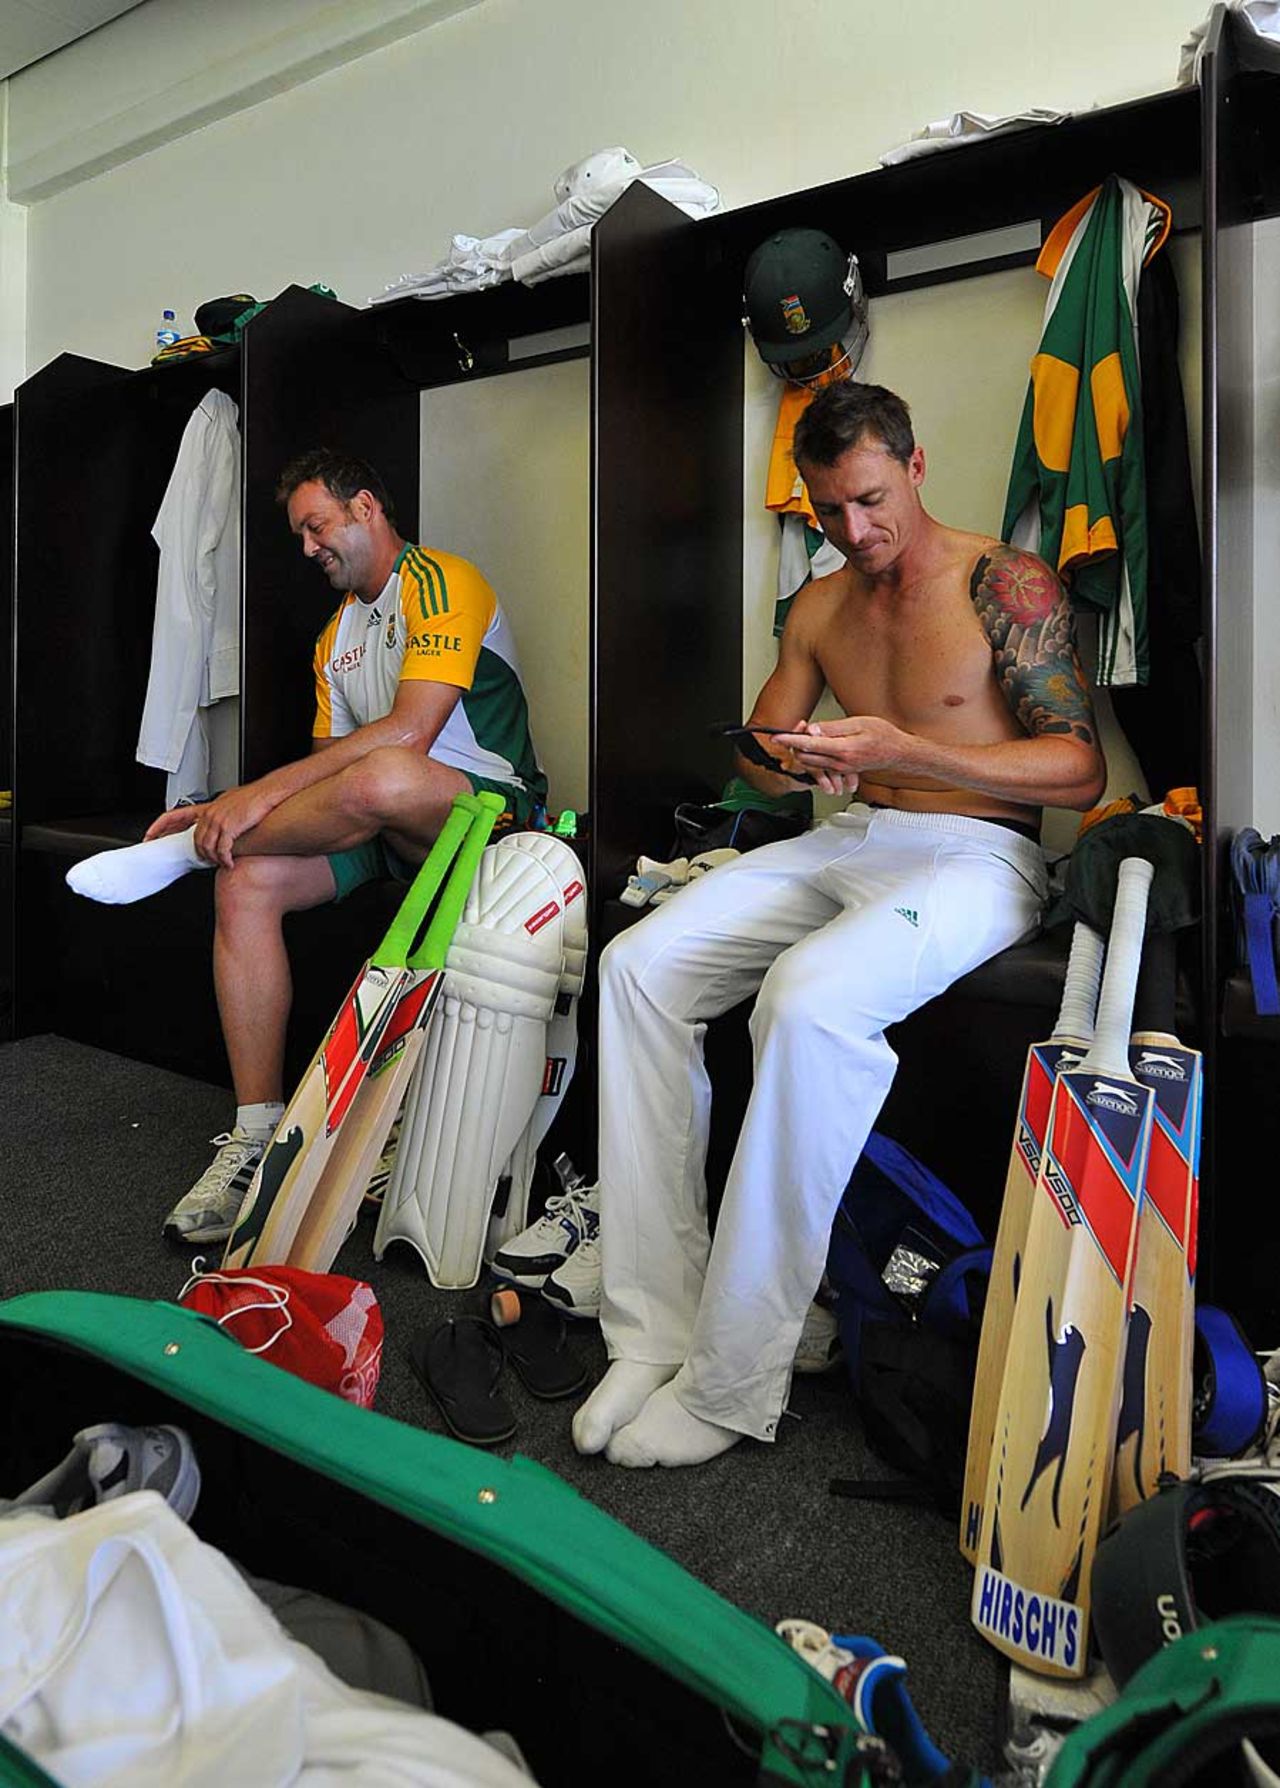 Dale Steyn and Jacques Kallis share a light moment in the dressing room, South Africa v Sri Lanka, 2nd Test, Durban, 4th day, December 29, 2011